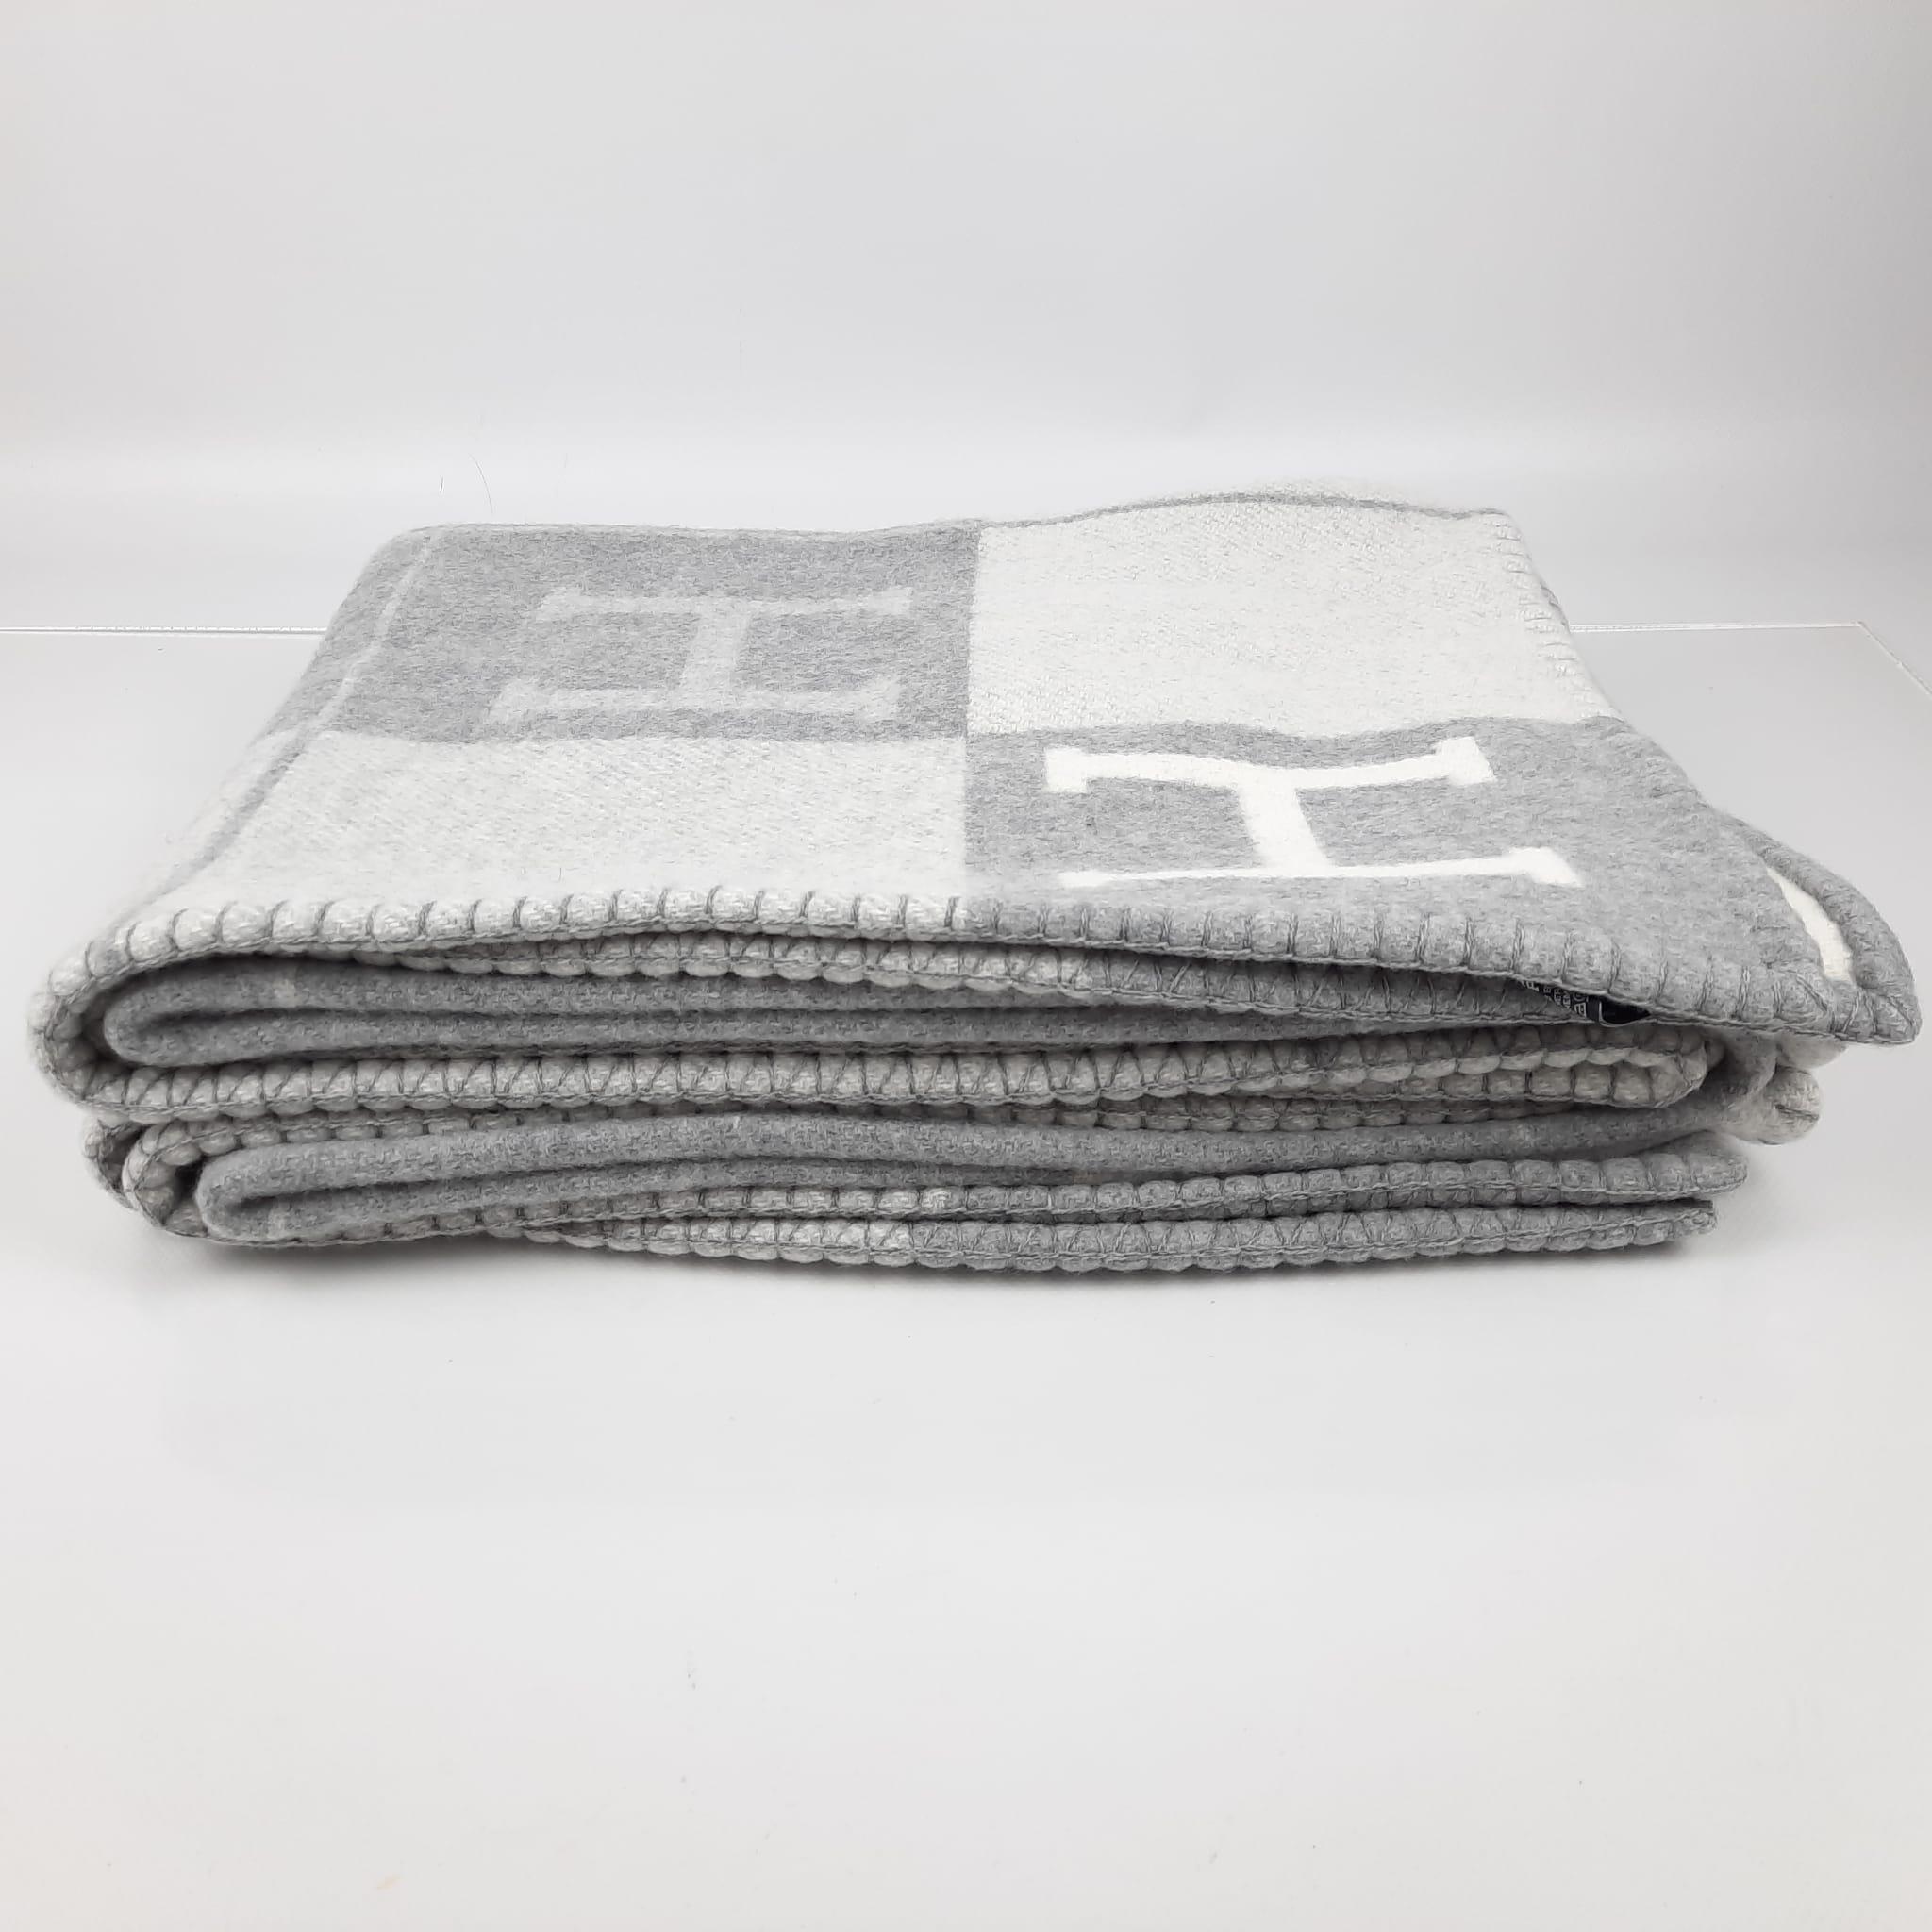 Throw blanket in jacquard woven wool and cashmere
Finished with blanket stitch
Dimensions: 135 x 170 cm